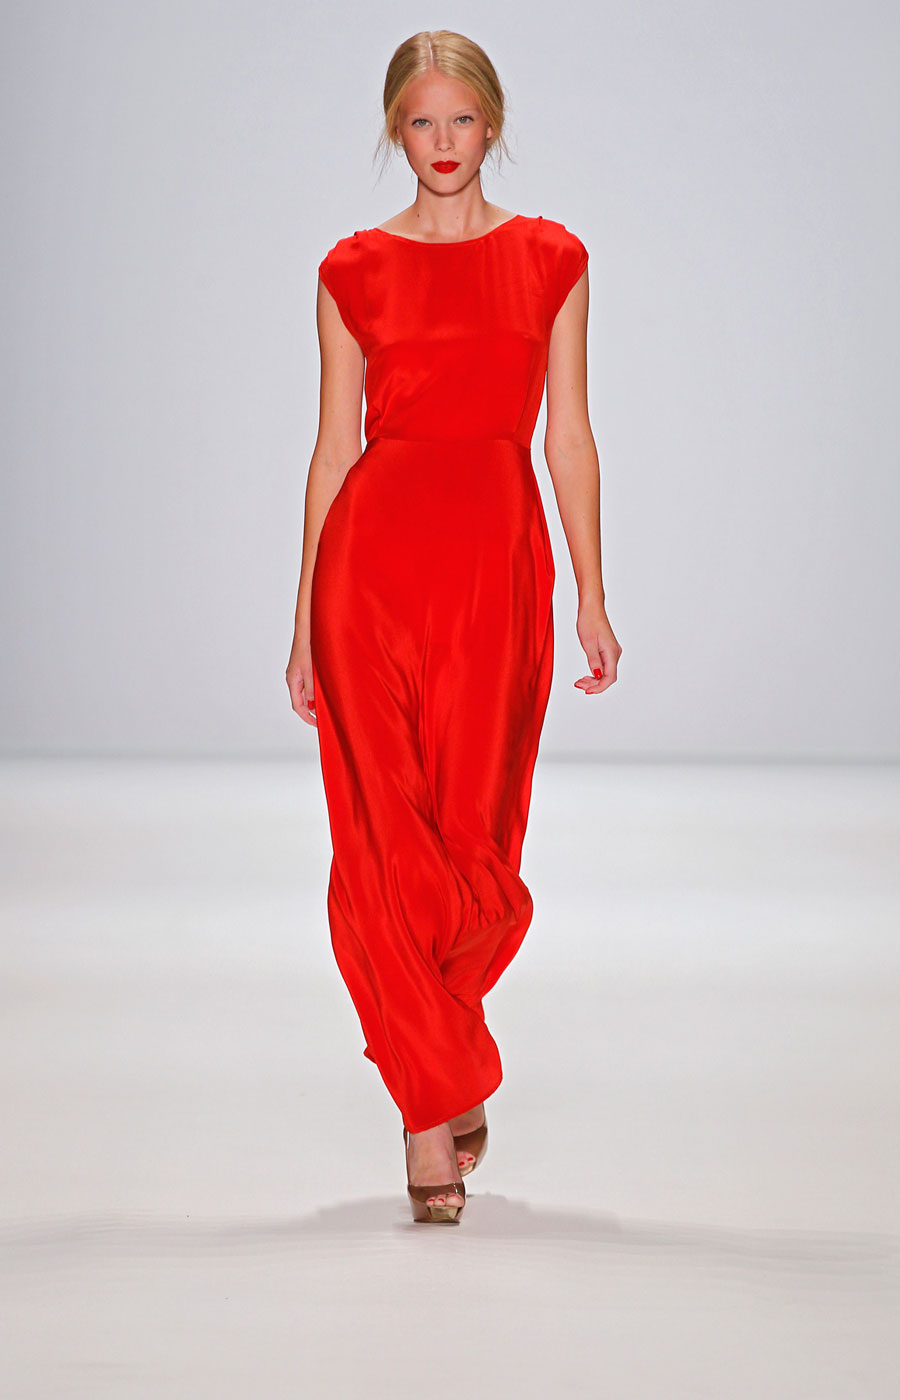 Spring/Summer 2012 by Hien Le (2)